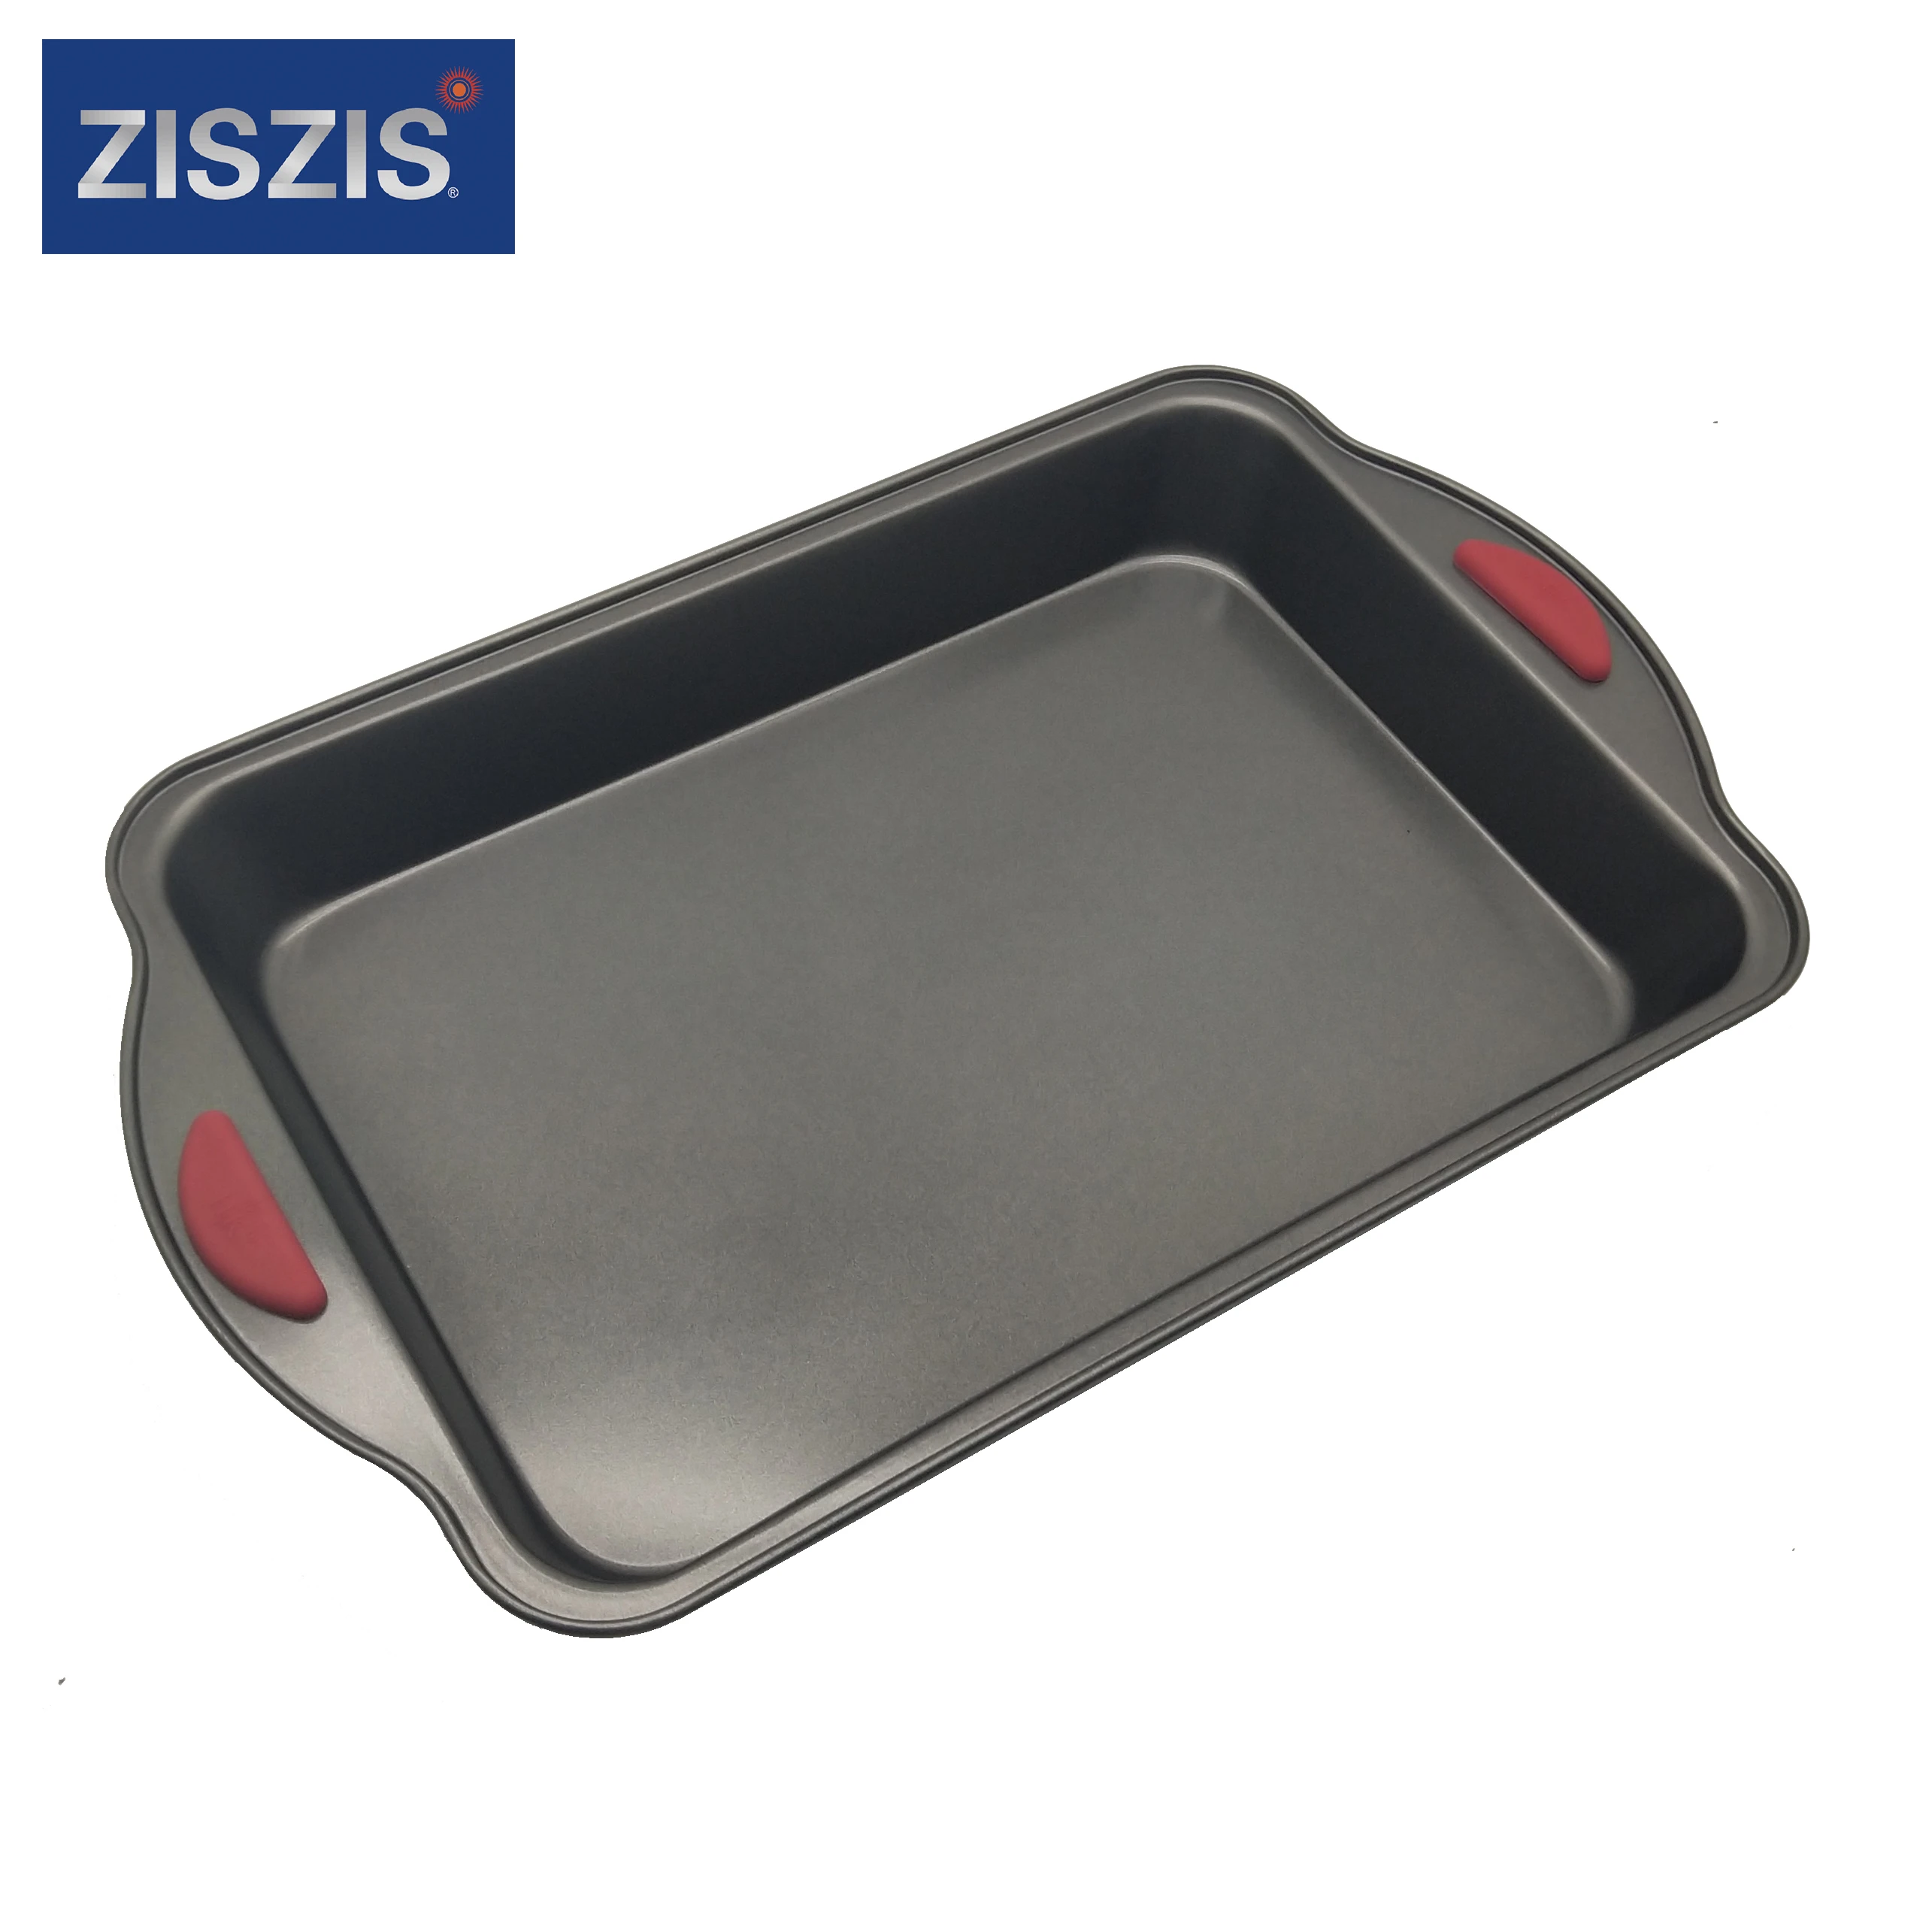 
Amazon hot selling Nonstick Carbon Steel Bakeware Sets With Red Silicone Handles Nonstick Baking Tray 